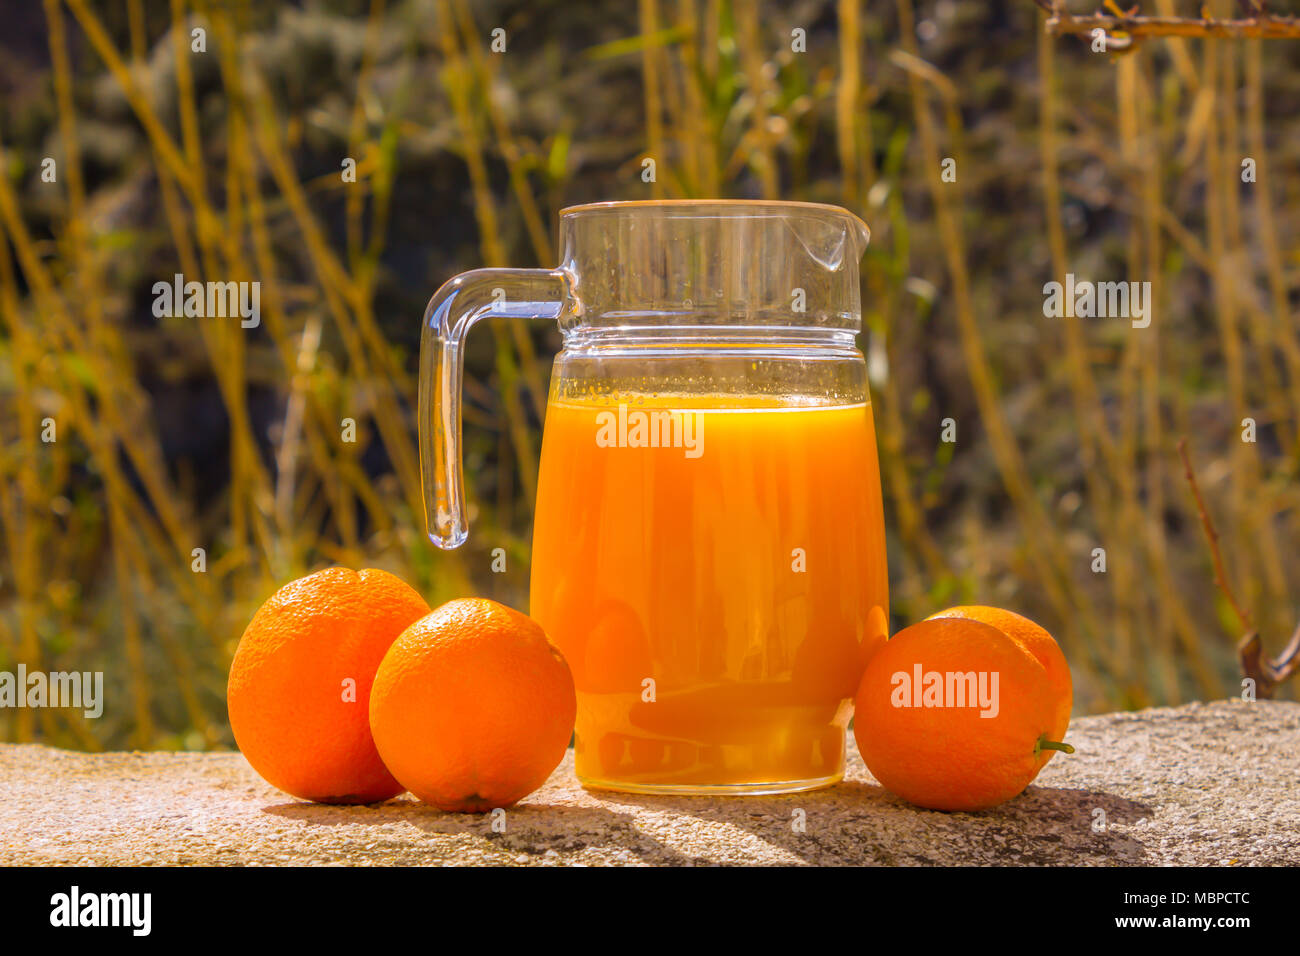 https://c8.alamy.com/comp/MBPCTC/freshly-squeezed-orange-juice-in-a-glass-pitcher-made-with-fresh-oranges-outside-with-a-natural-backdrop-MBPCTC.jpg